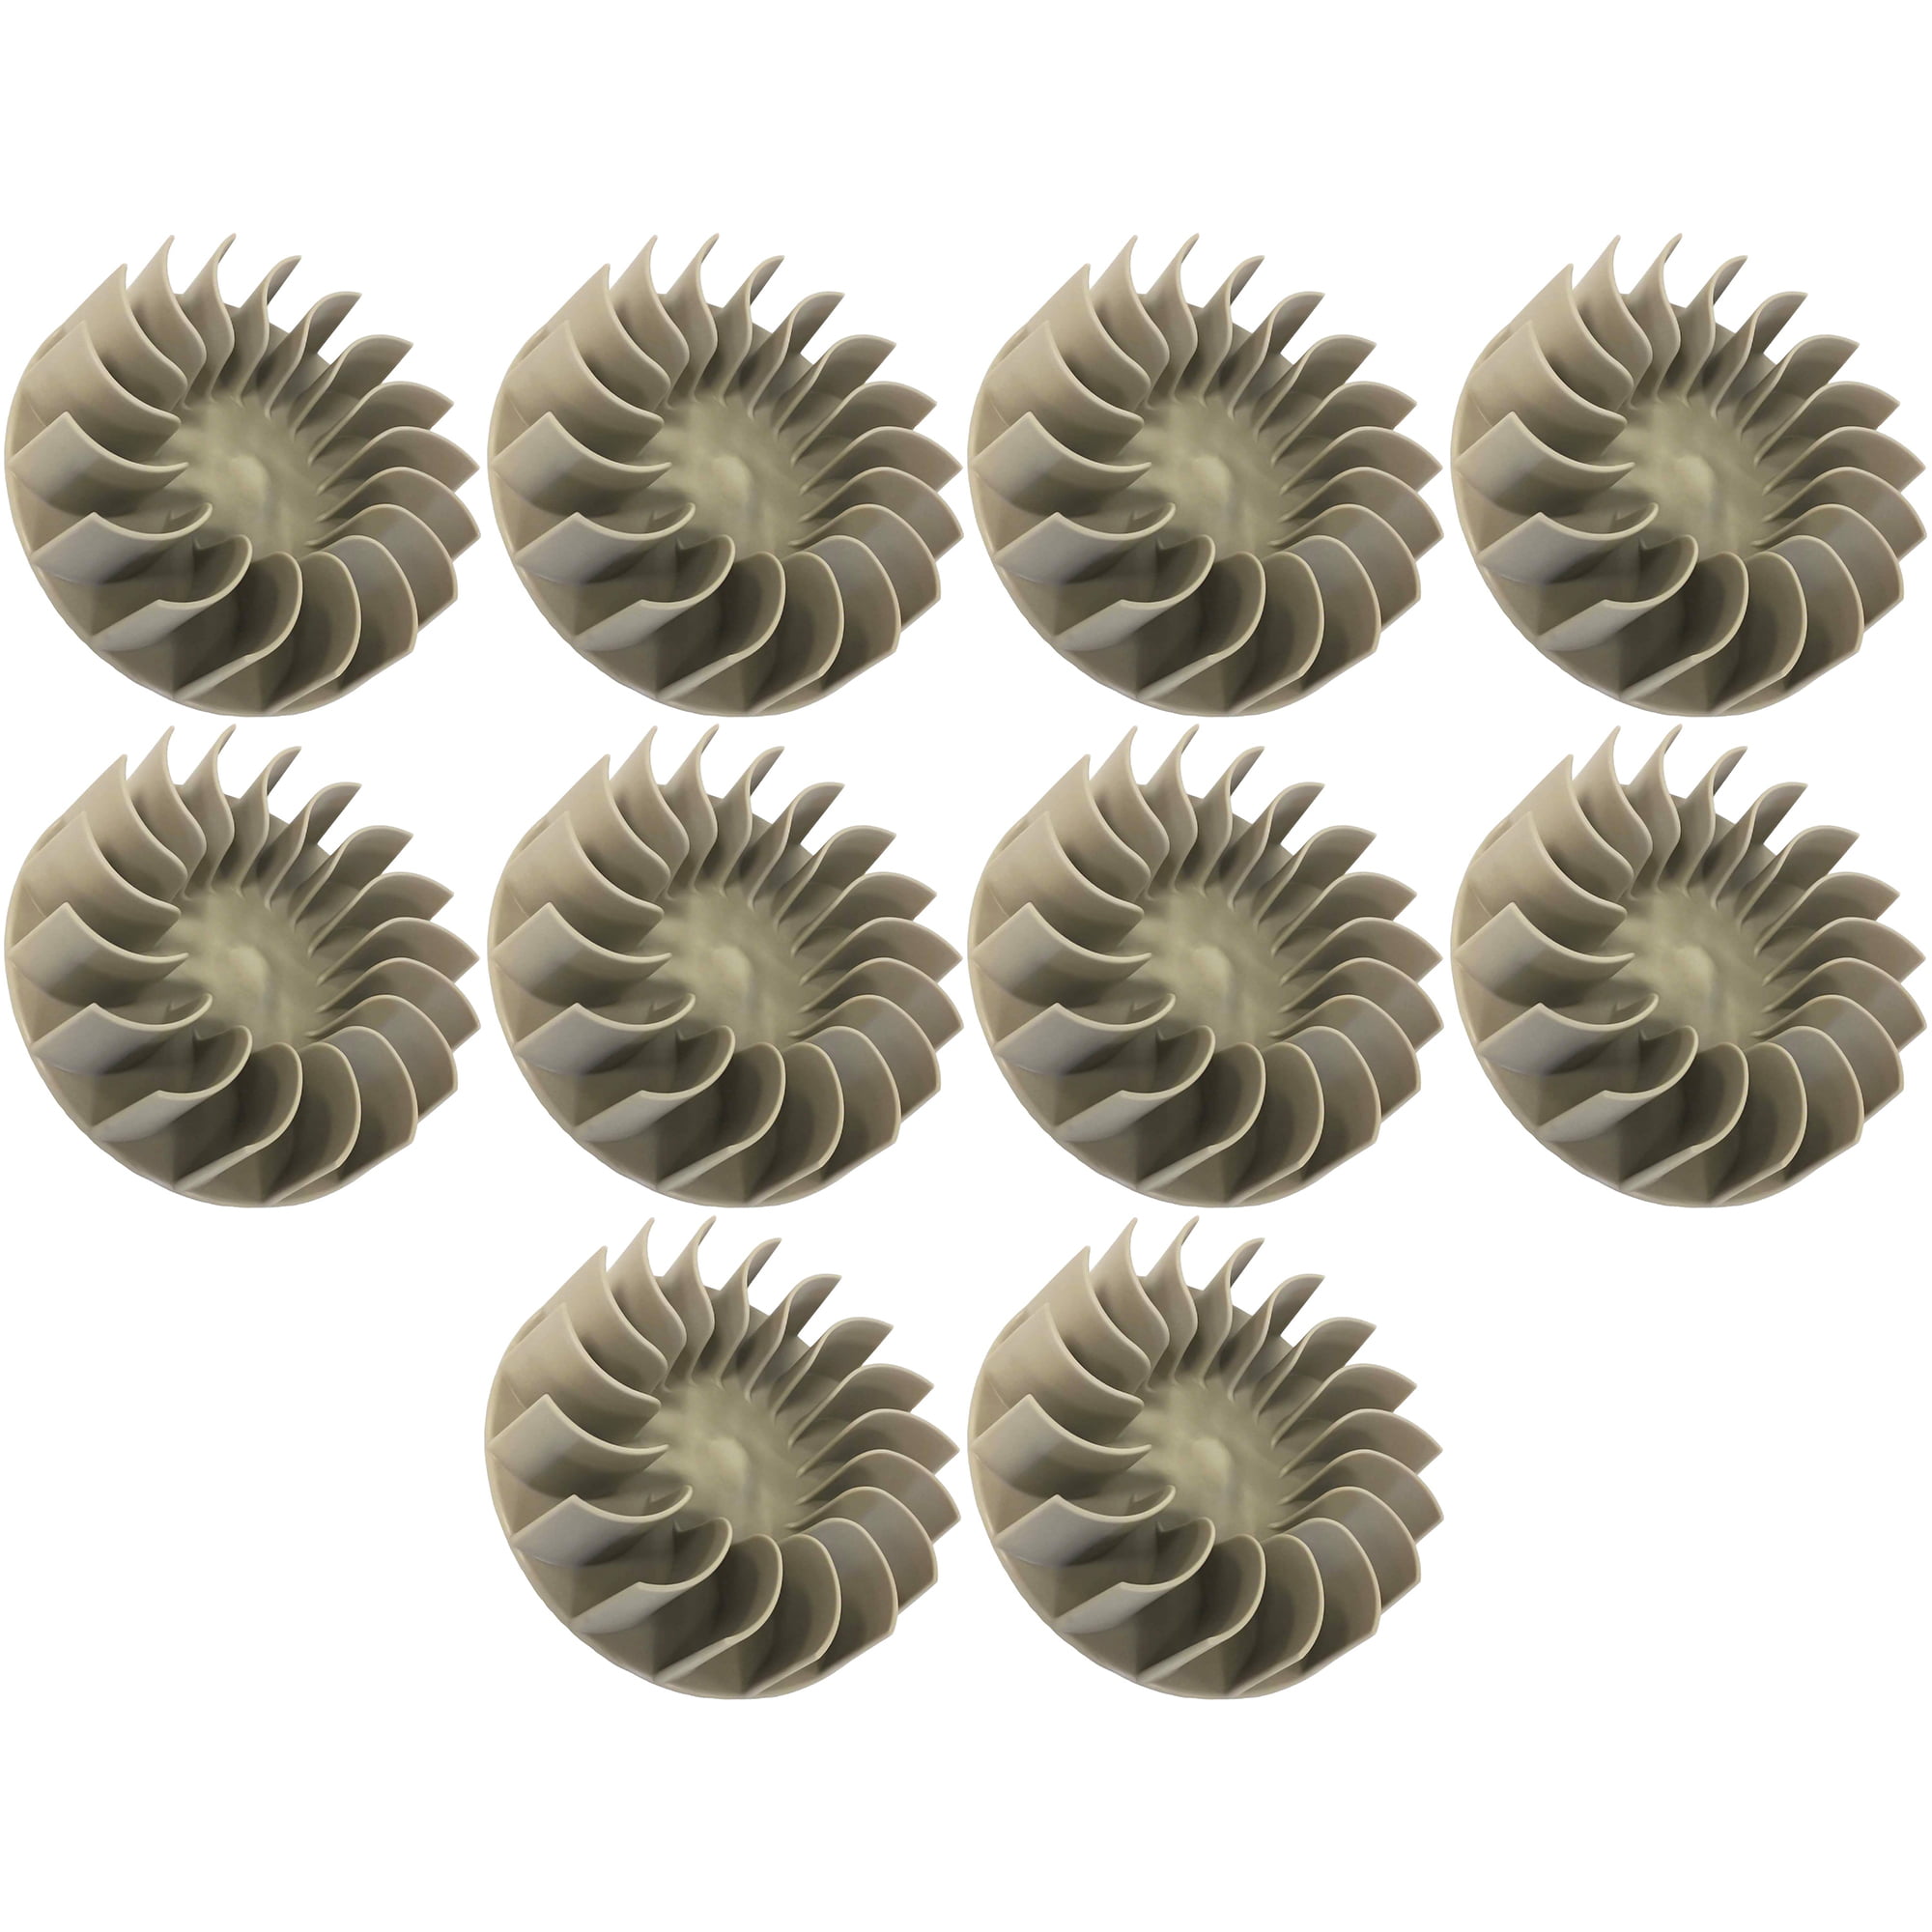 Sears 6 Pack 694089 279711 Clothes Dryer Blower Wheel for Whirlpool 